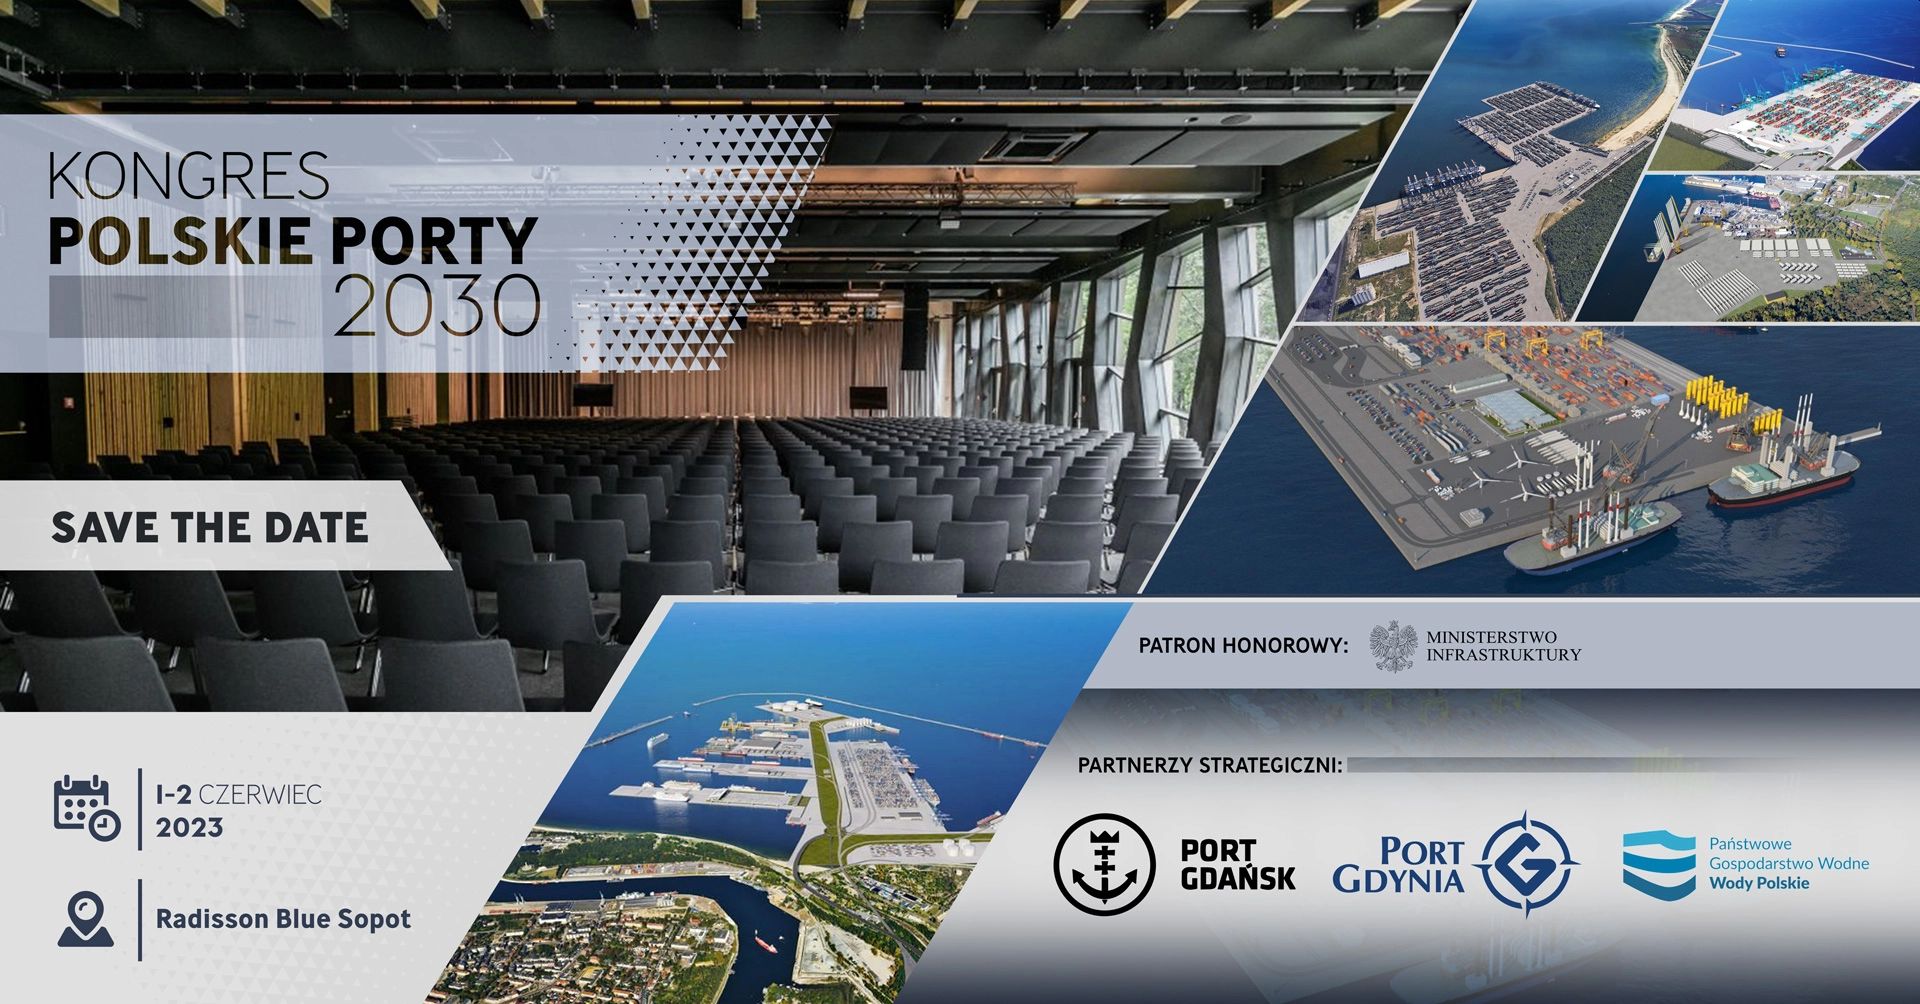 The Polish Ports 2030 Congress in June - invitation and patronage of the Ministry of Infrastructure - MarinePoland.com